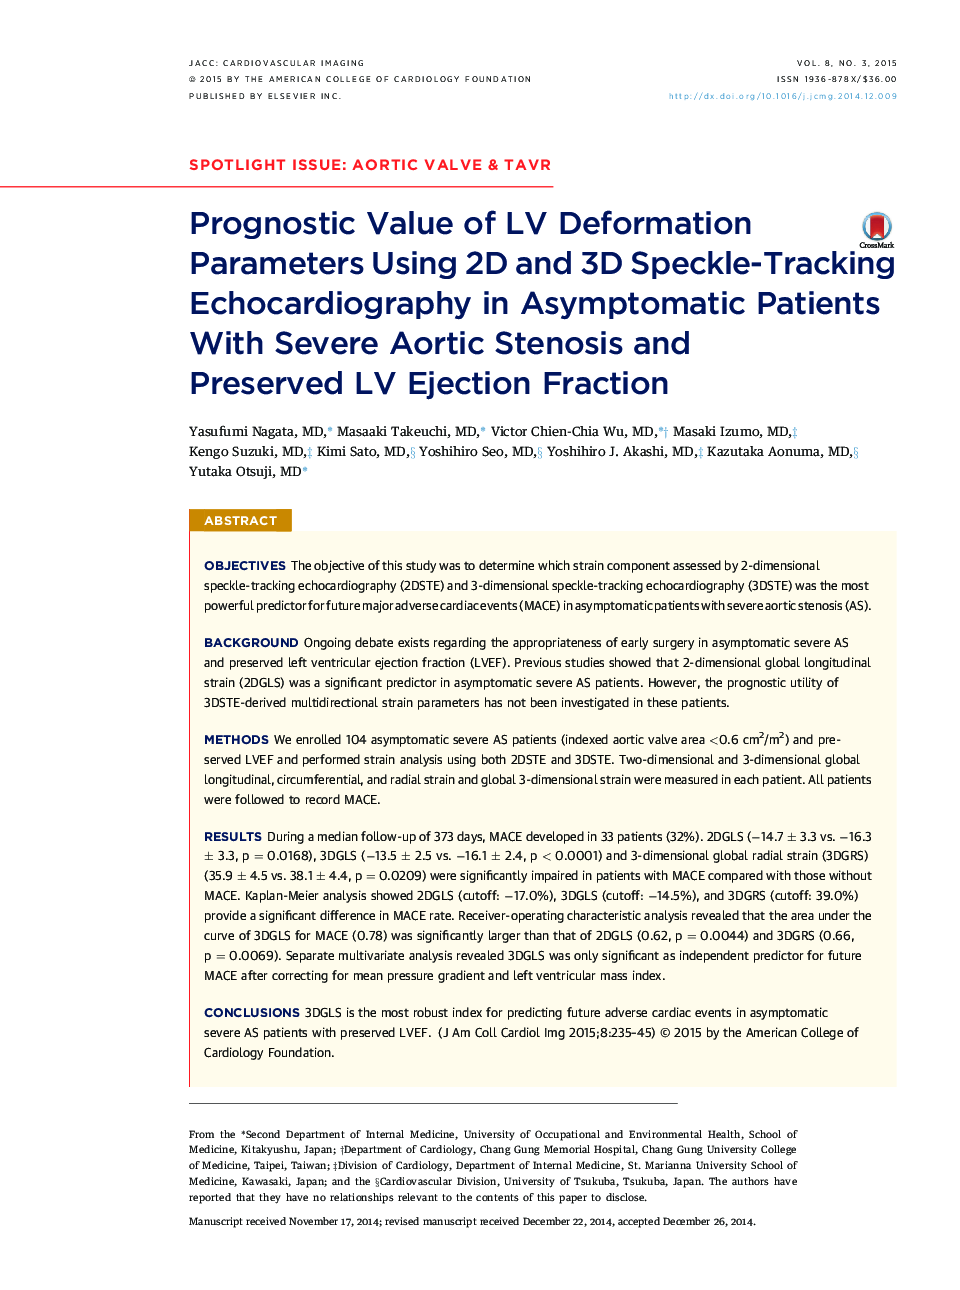 Prognostic Value of LV Deformation Parameters Using 2D and 3D Speckle-Tracking Echocardiography in Asymptomatic Patients With Severe Aortic Stenosis and Preserved LV Ejection Fraction 